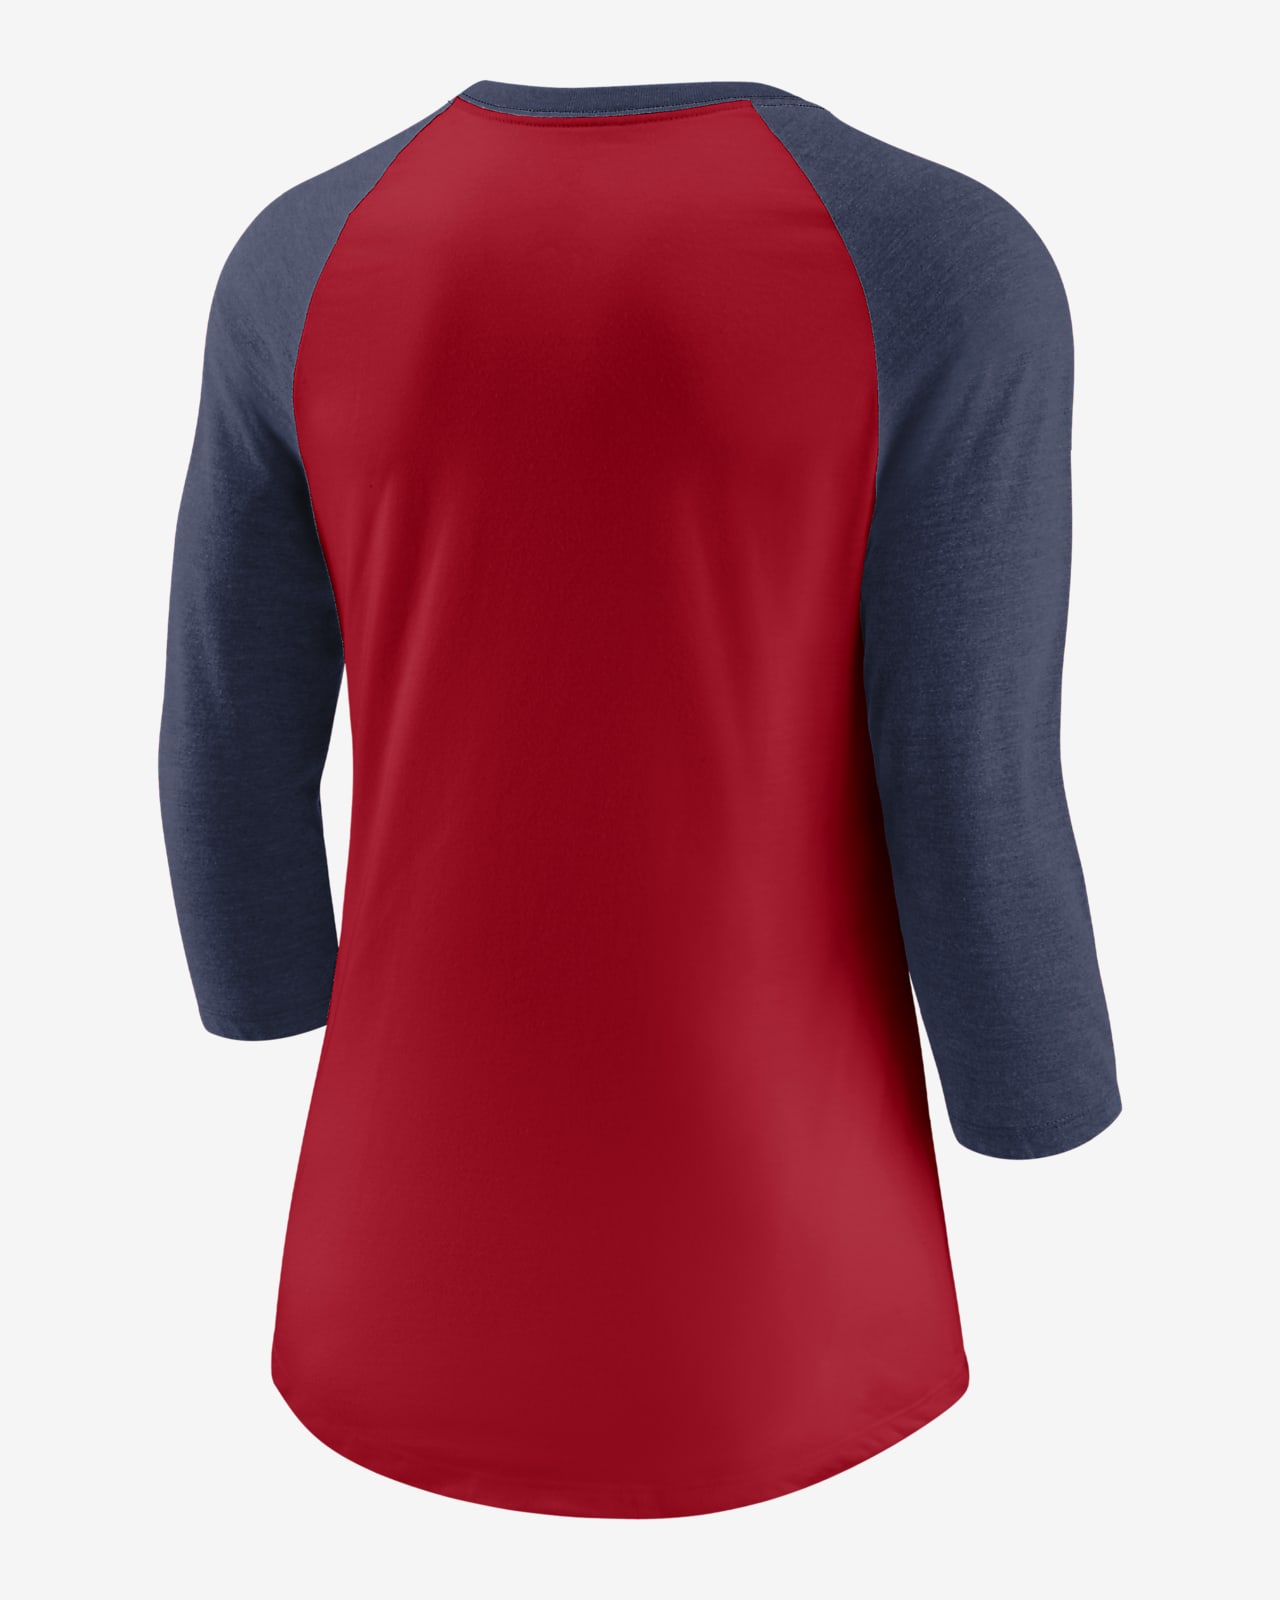 Nike Next Up (MLB Boston Red Sox) Women's 3/4-Sleeve Top